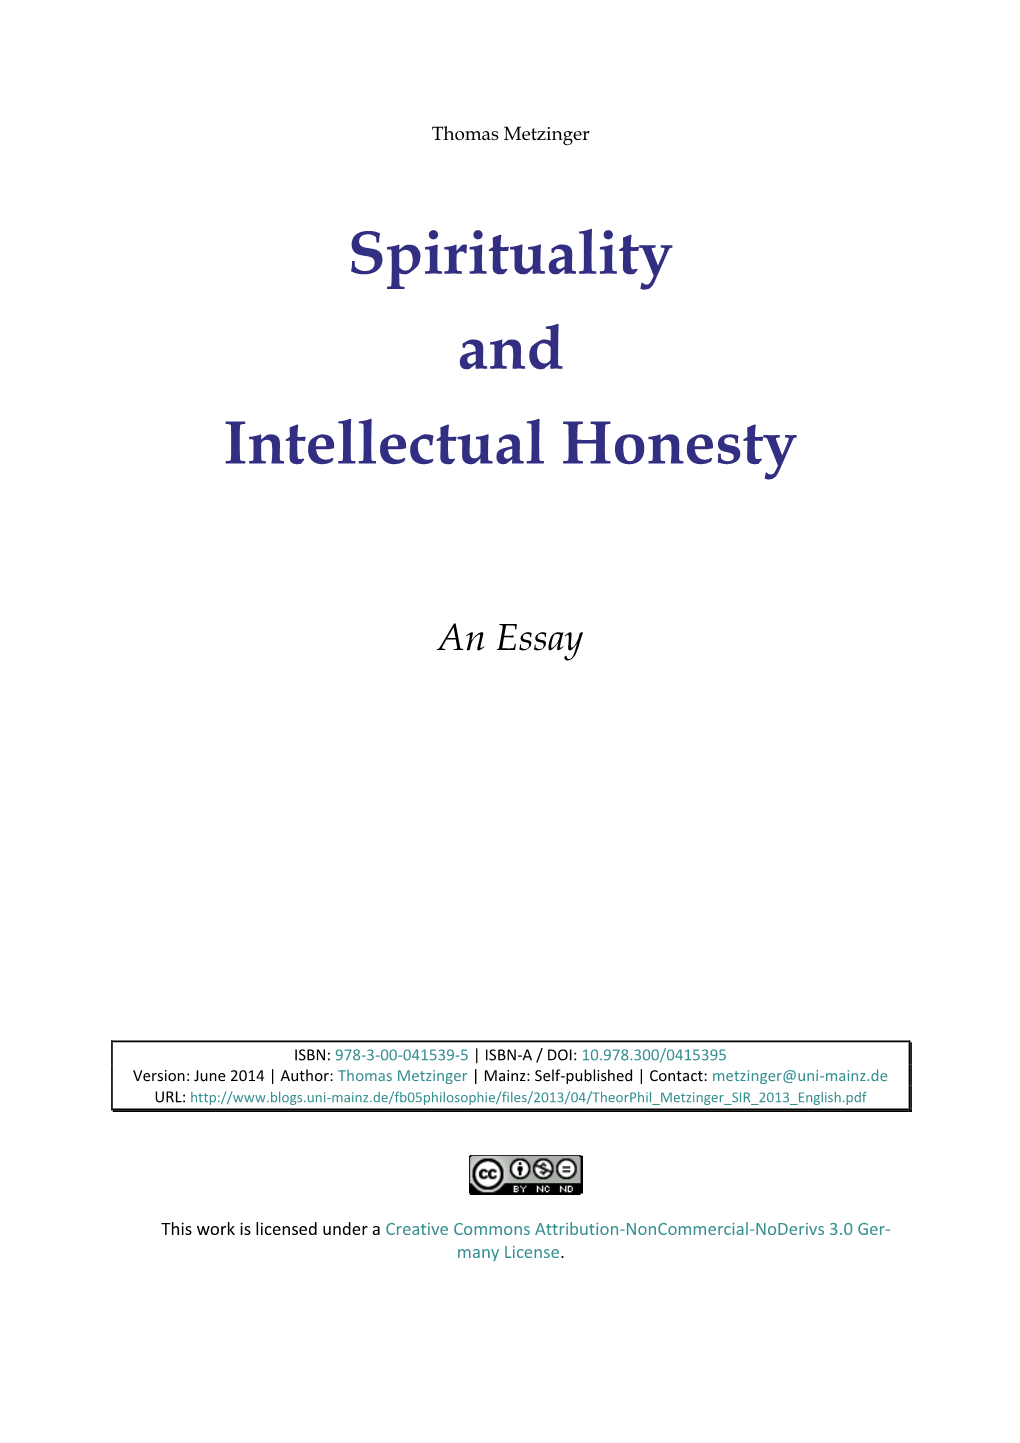 Spirituality and Intellectual Honesty